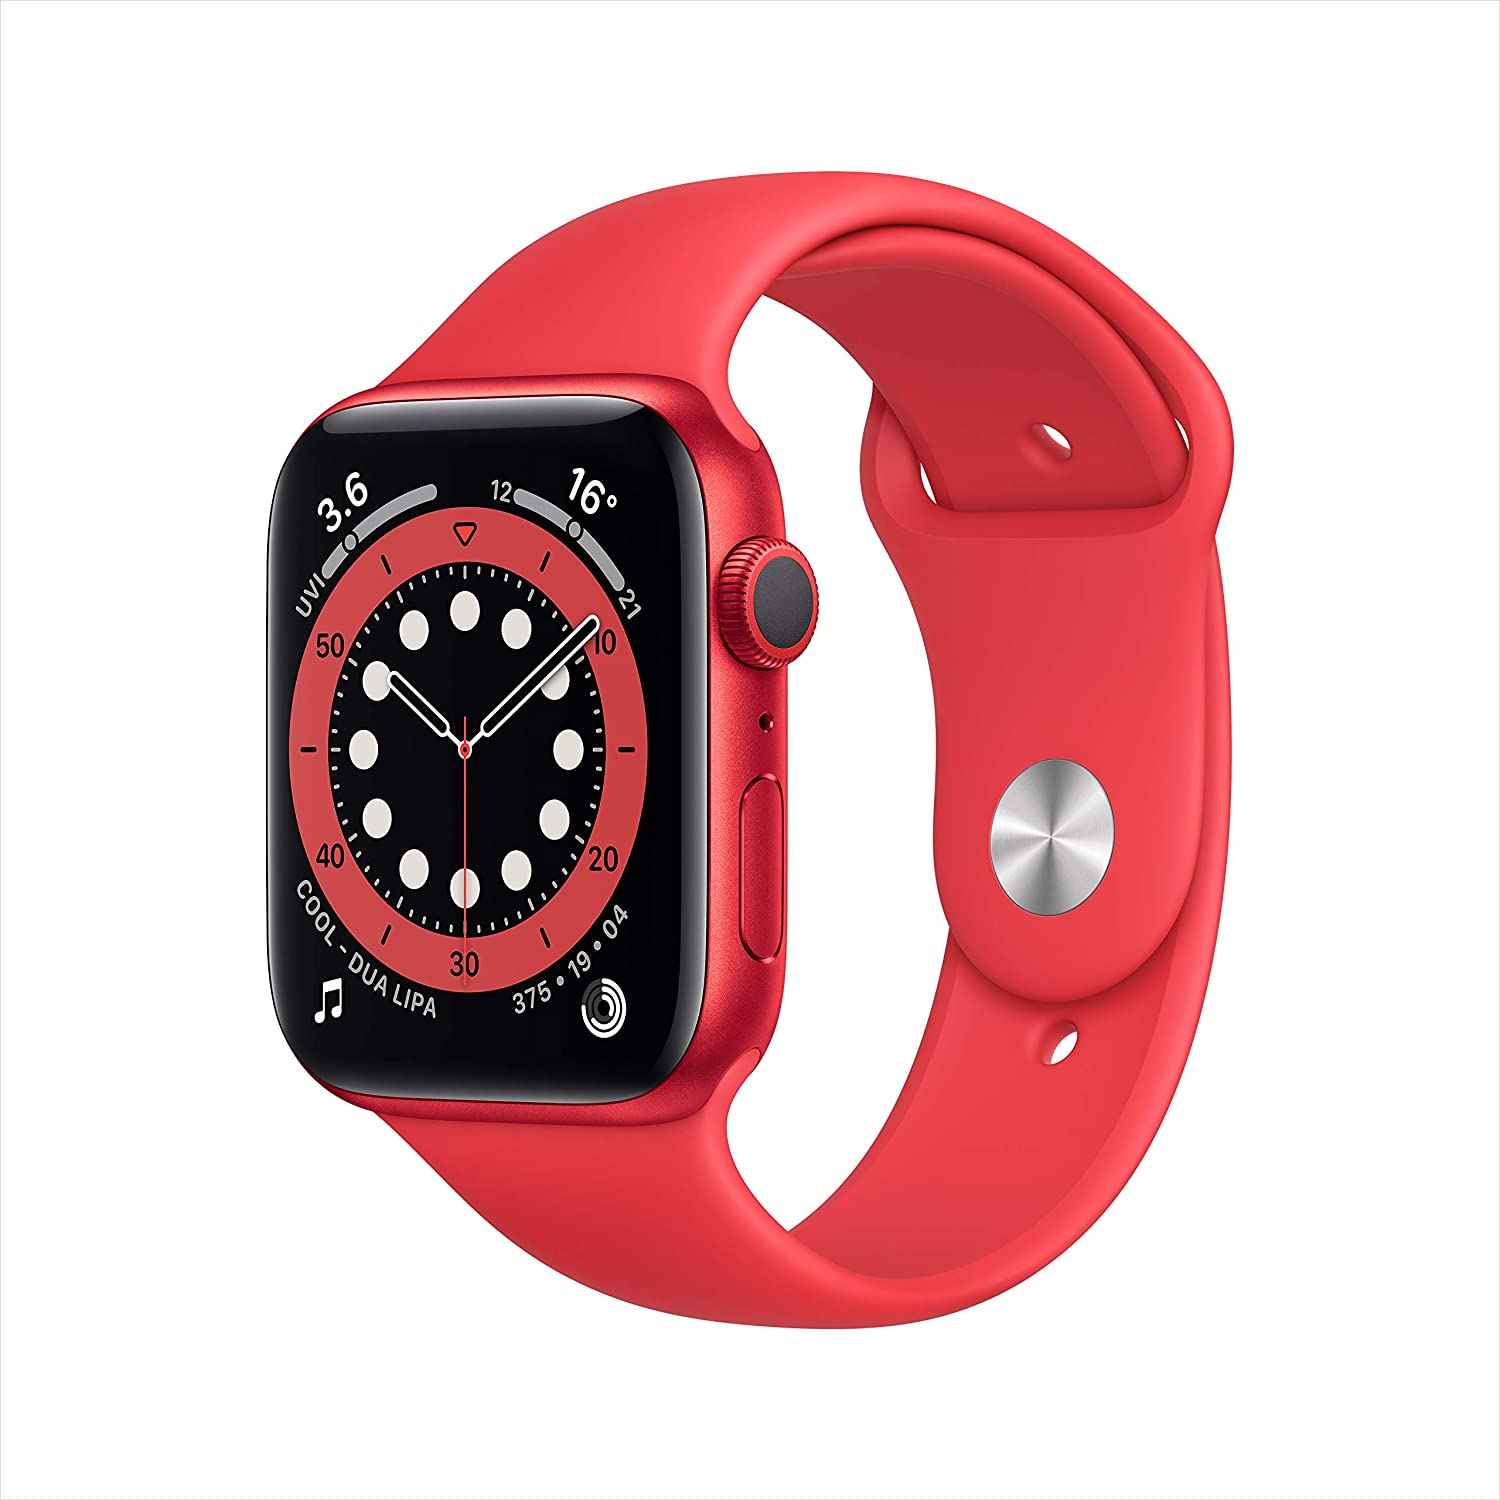 Apple Watch Series 6 (GPS, 44mm) - PRODUCT(RED) - Aluminum Case with PRODUCT(RED) - Sport Band